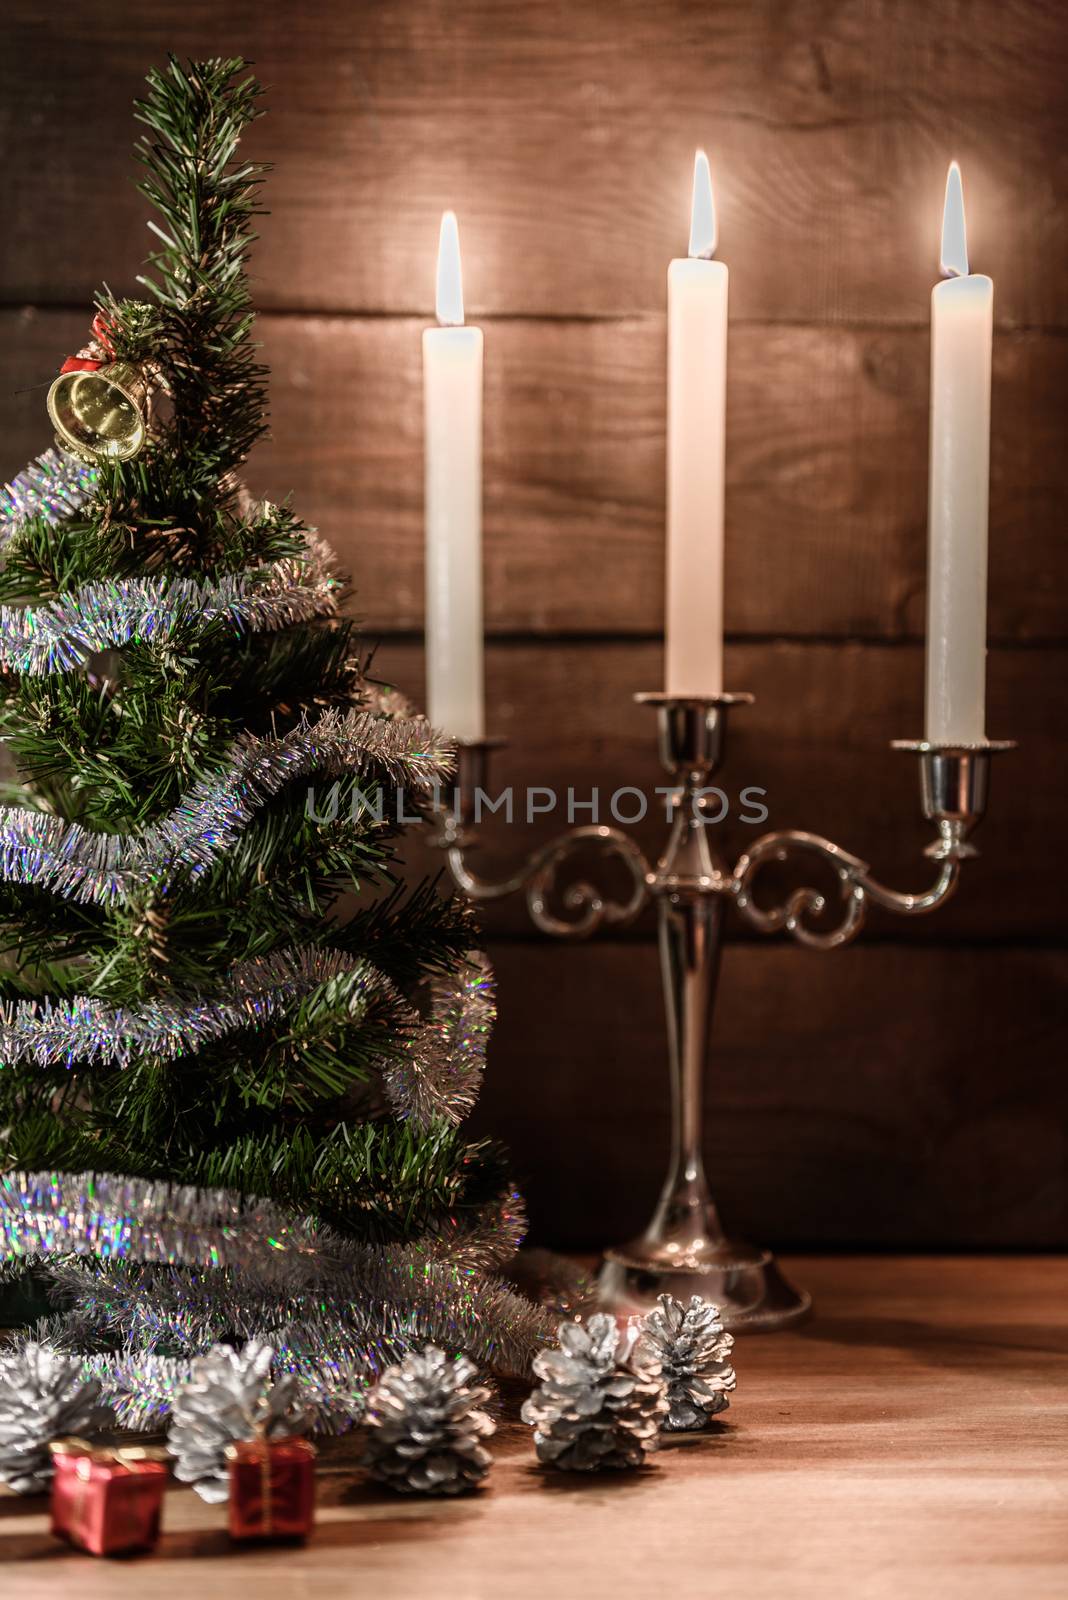 Christmas decorative tree by Andreua